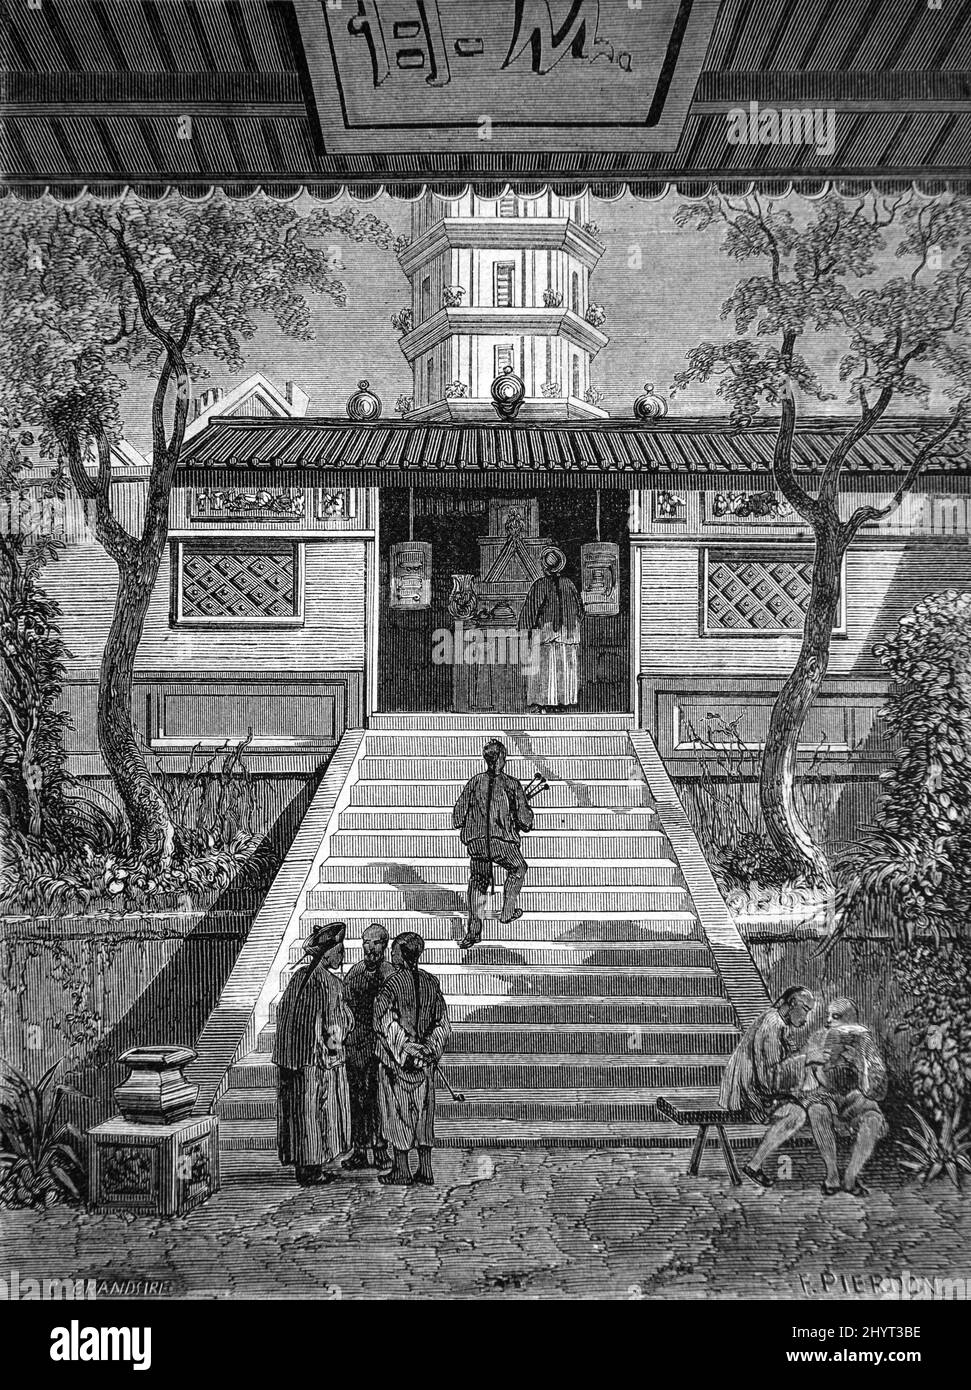 Whampoa Pagoda or Chinese Buddhist Temple Hong Kong. Vintage Illustration or Engraving 1860. Stock Photo